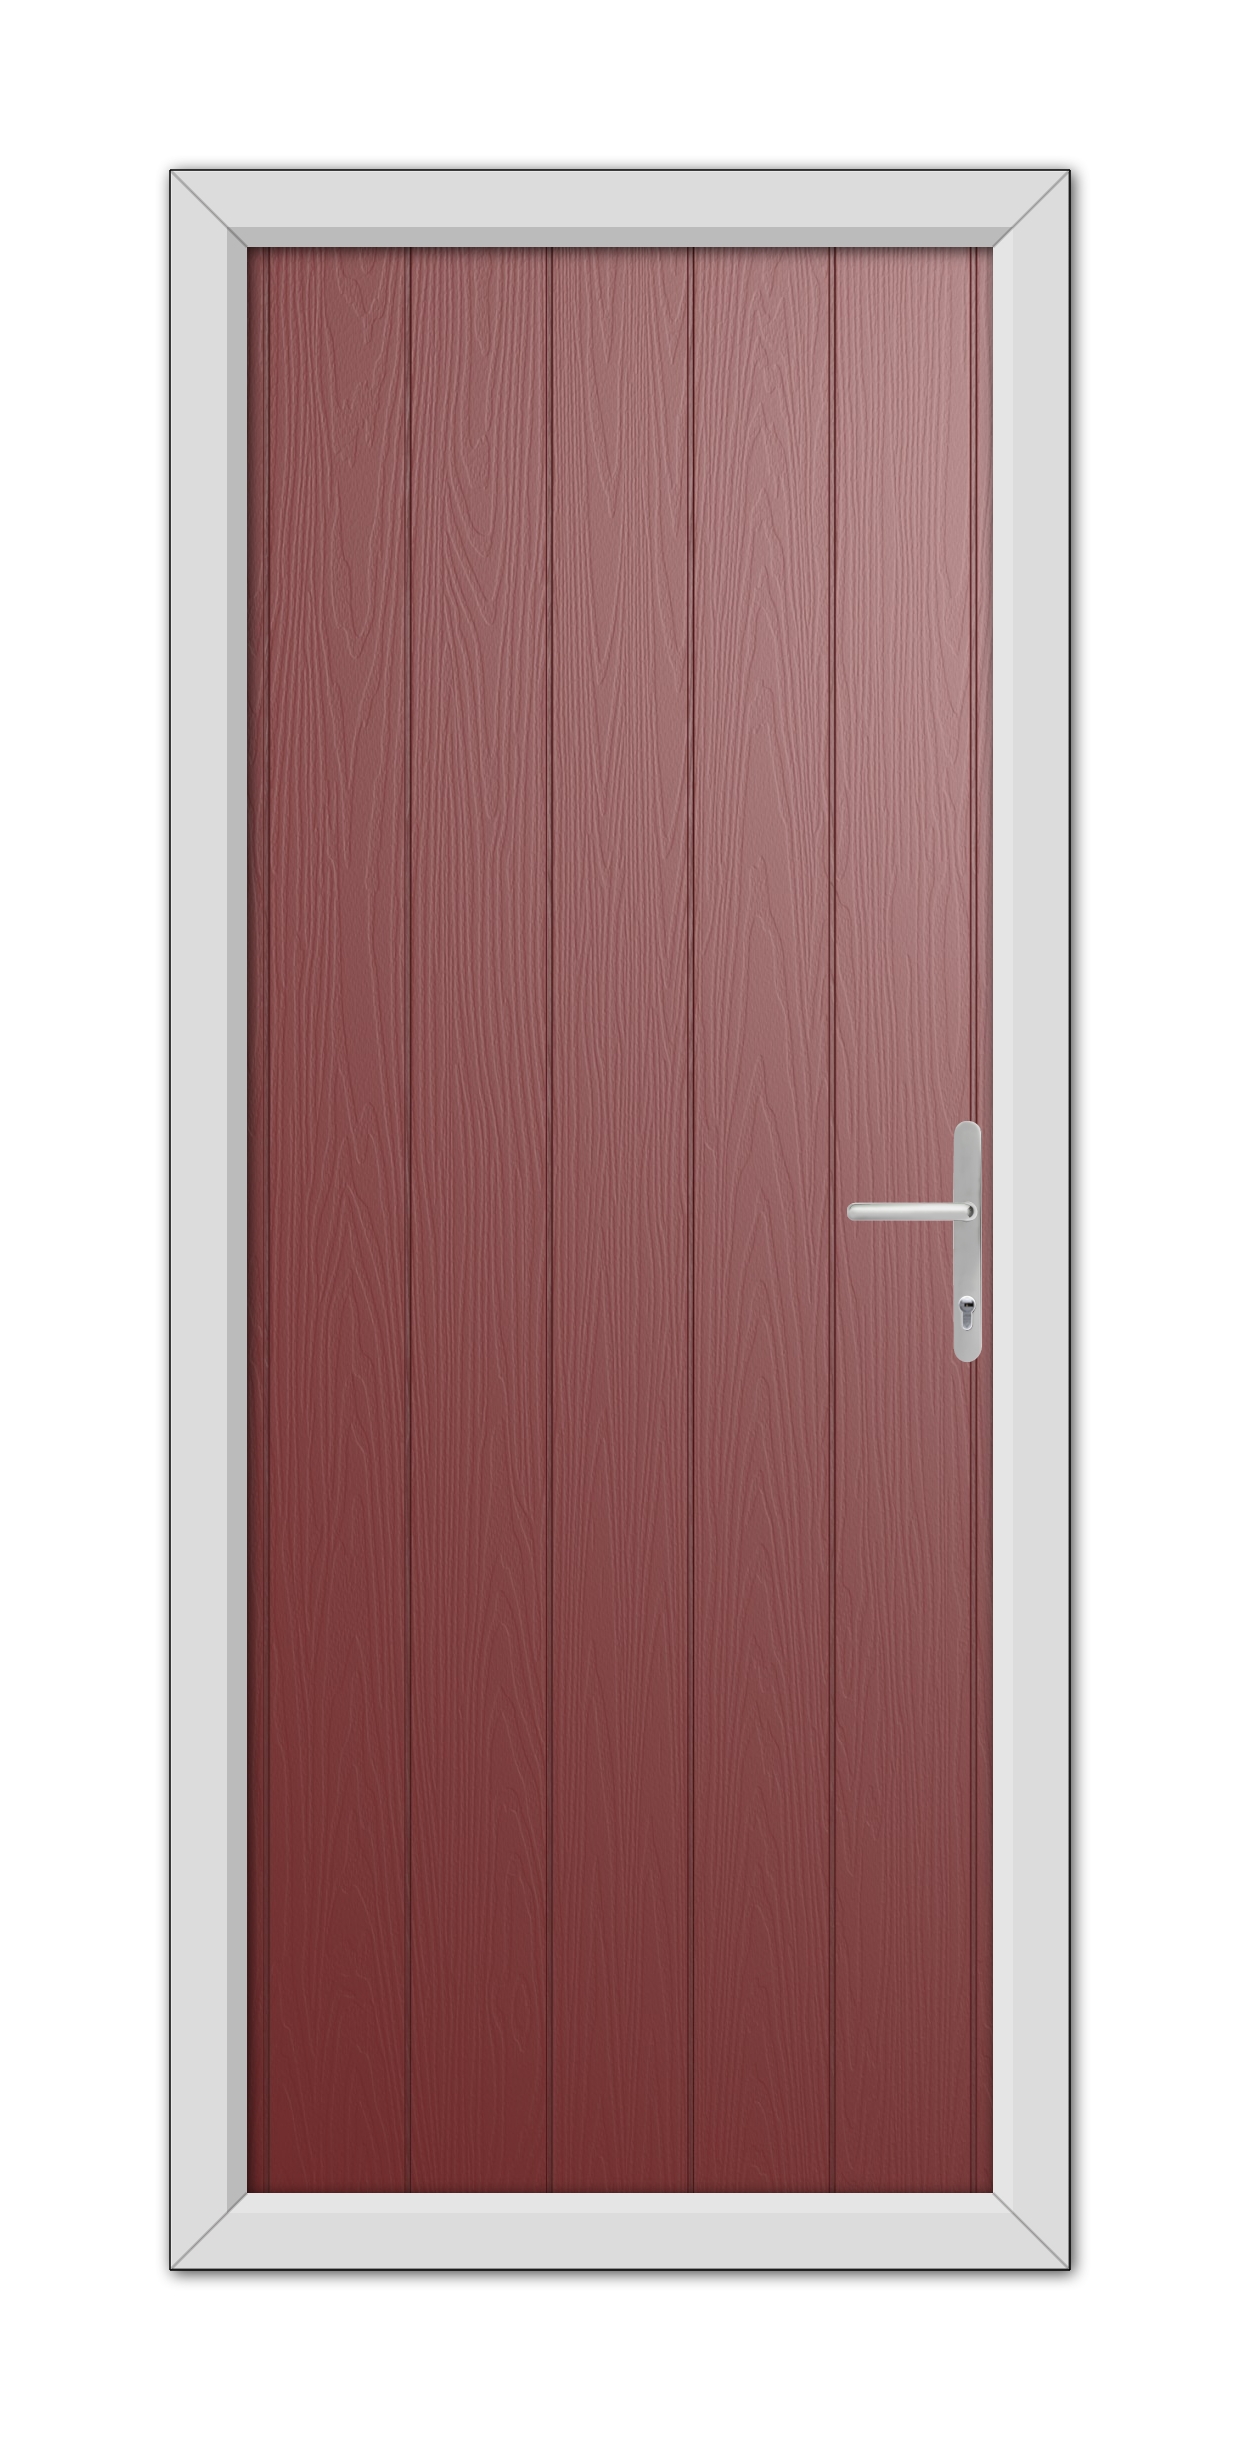 A Red Norfolk Solid Composite Door 48mm Timber Core with a vertical panel design and a silver handle, set within a white door frame.